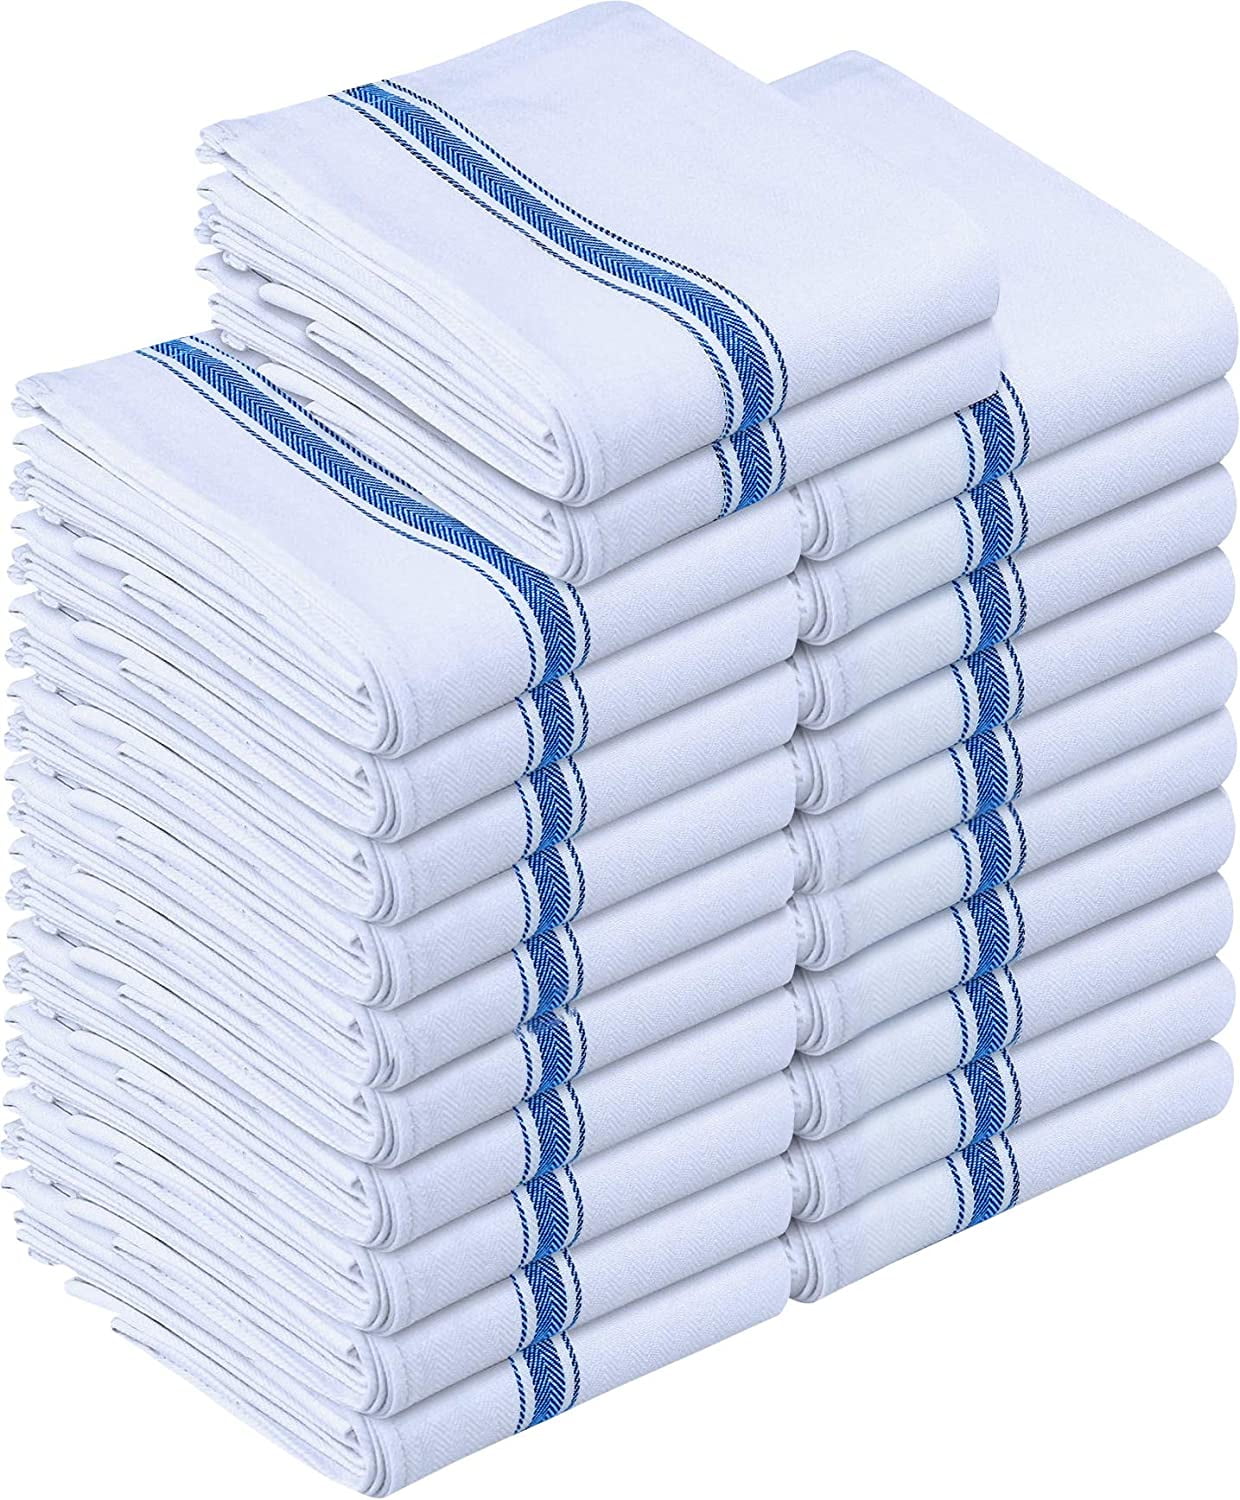 Utopia Towels 24 Pack Dish Towels, 15 x 25 Inches Ultra Soft Cotton Dish  Cloths, Blue